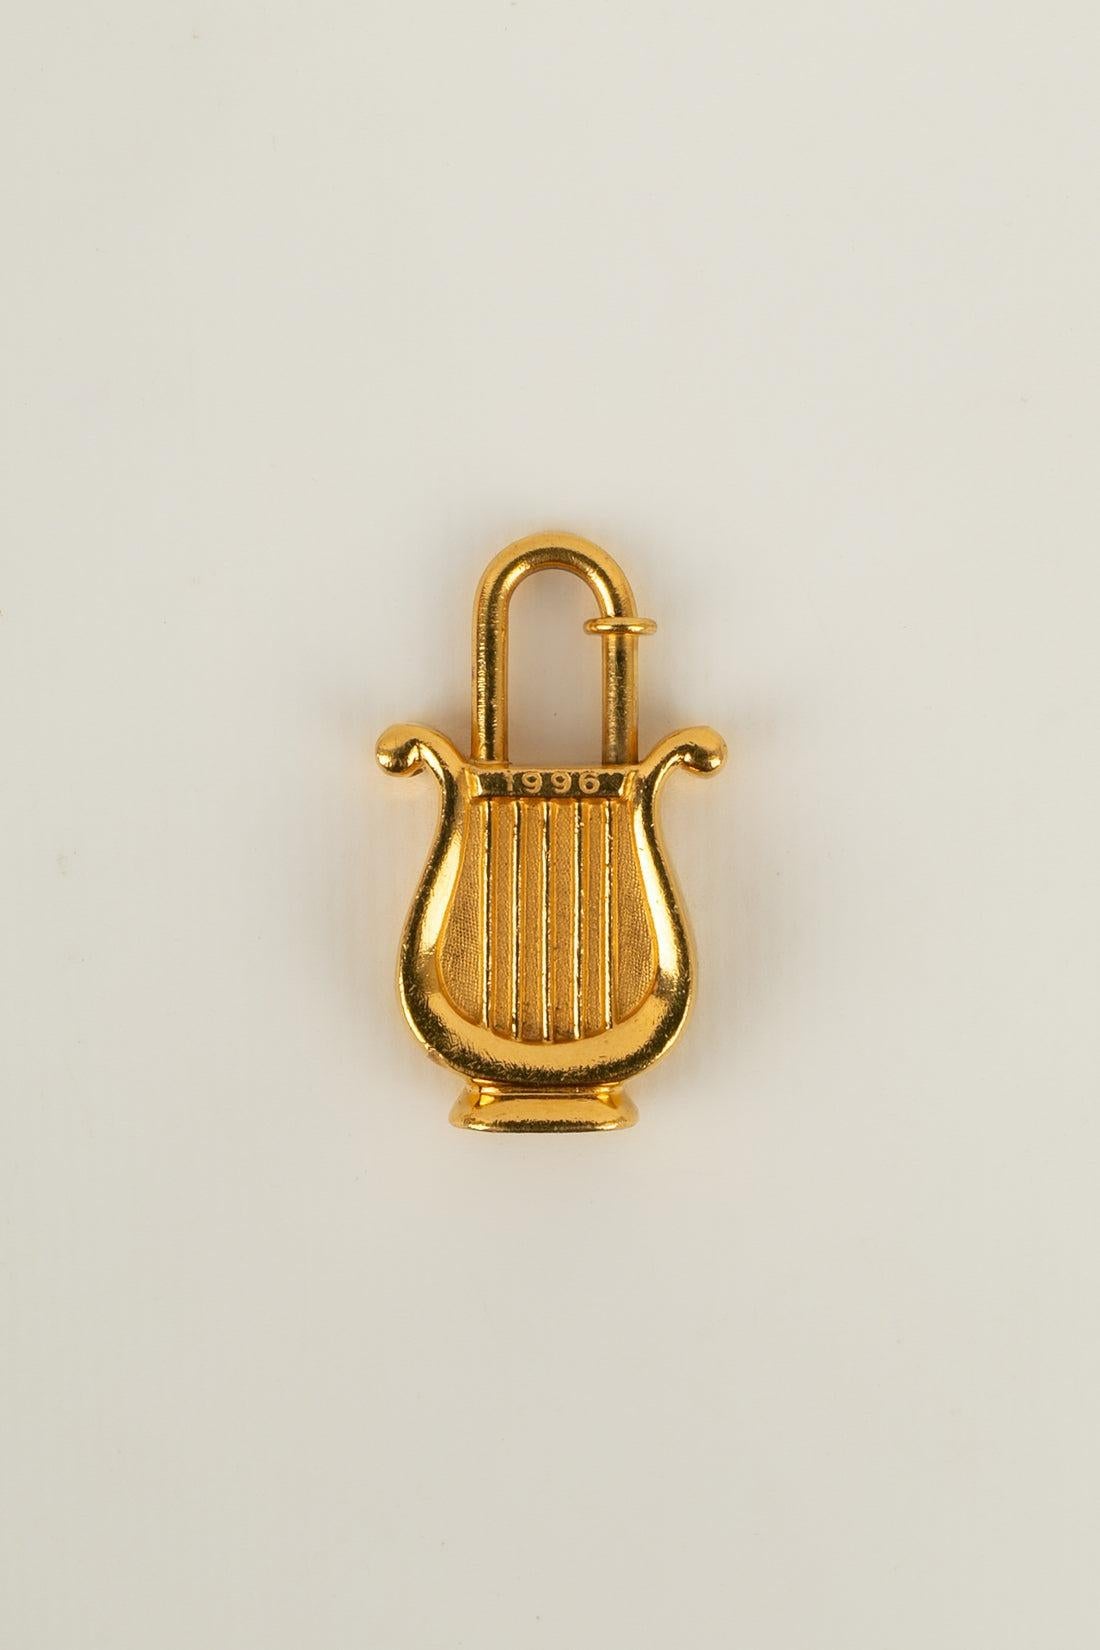 Hermès - Bag jewelry / Padlock in golden metal. Inscription: Année de la musique (year of music) 1996.

Additional information:
Condition: Very good condition
Dimensions: Height: 4 cm
Period: 20th Century

Seller Reference: ACC31